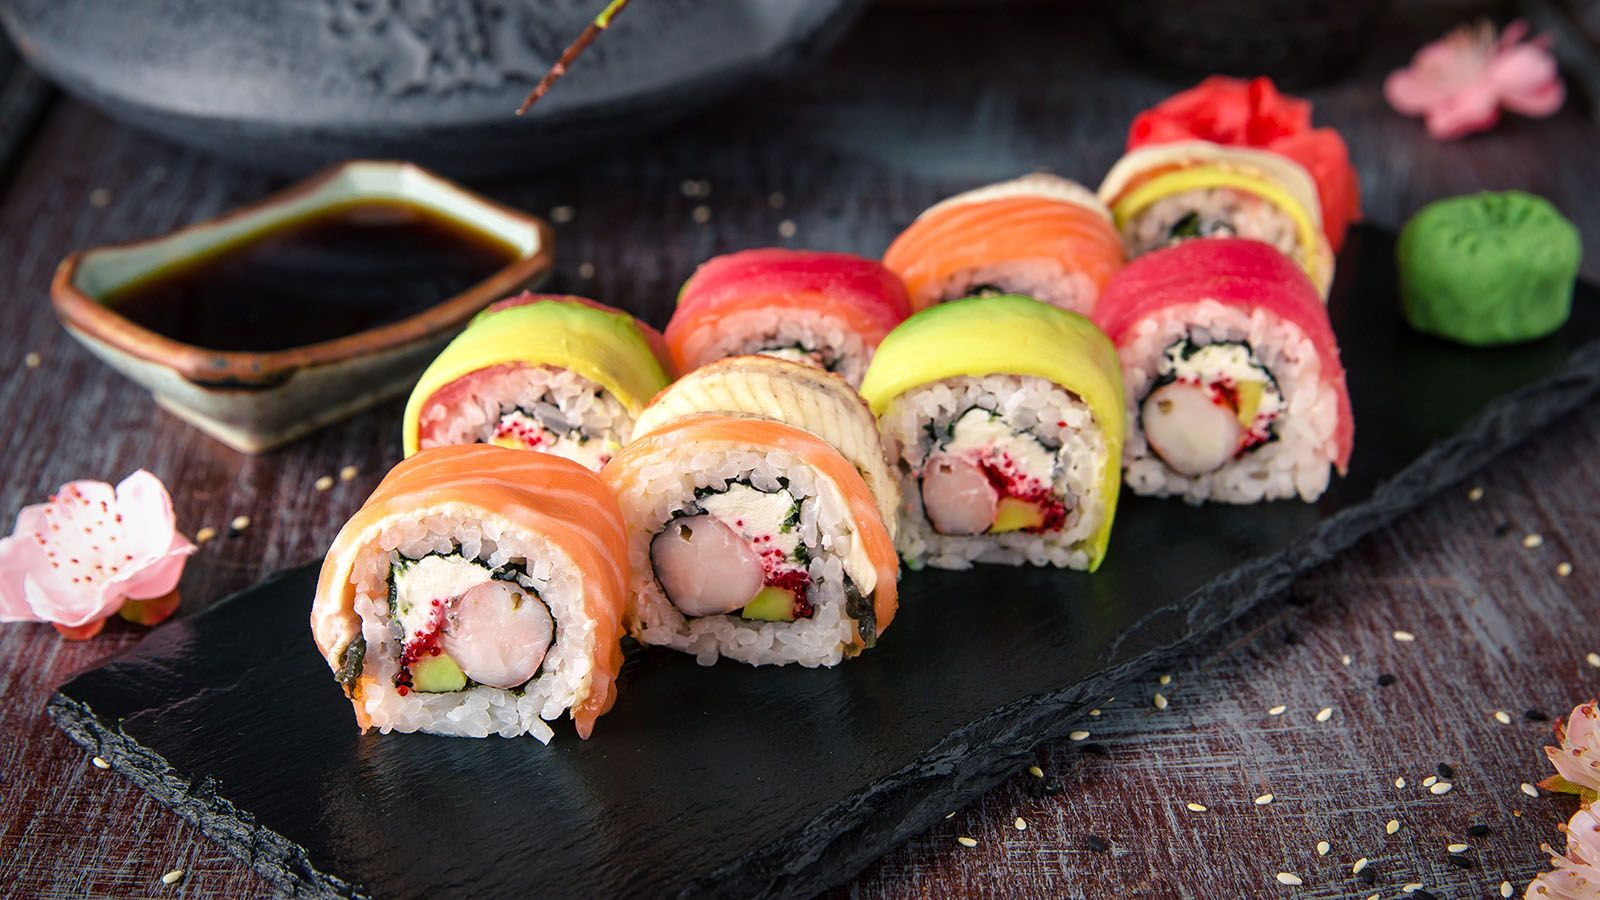 Sushi will soon be on the menu at Georgetown Square.